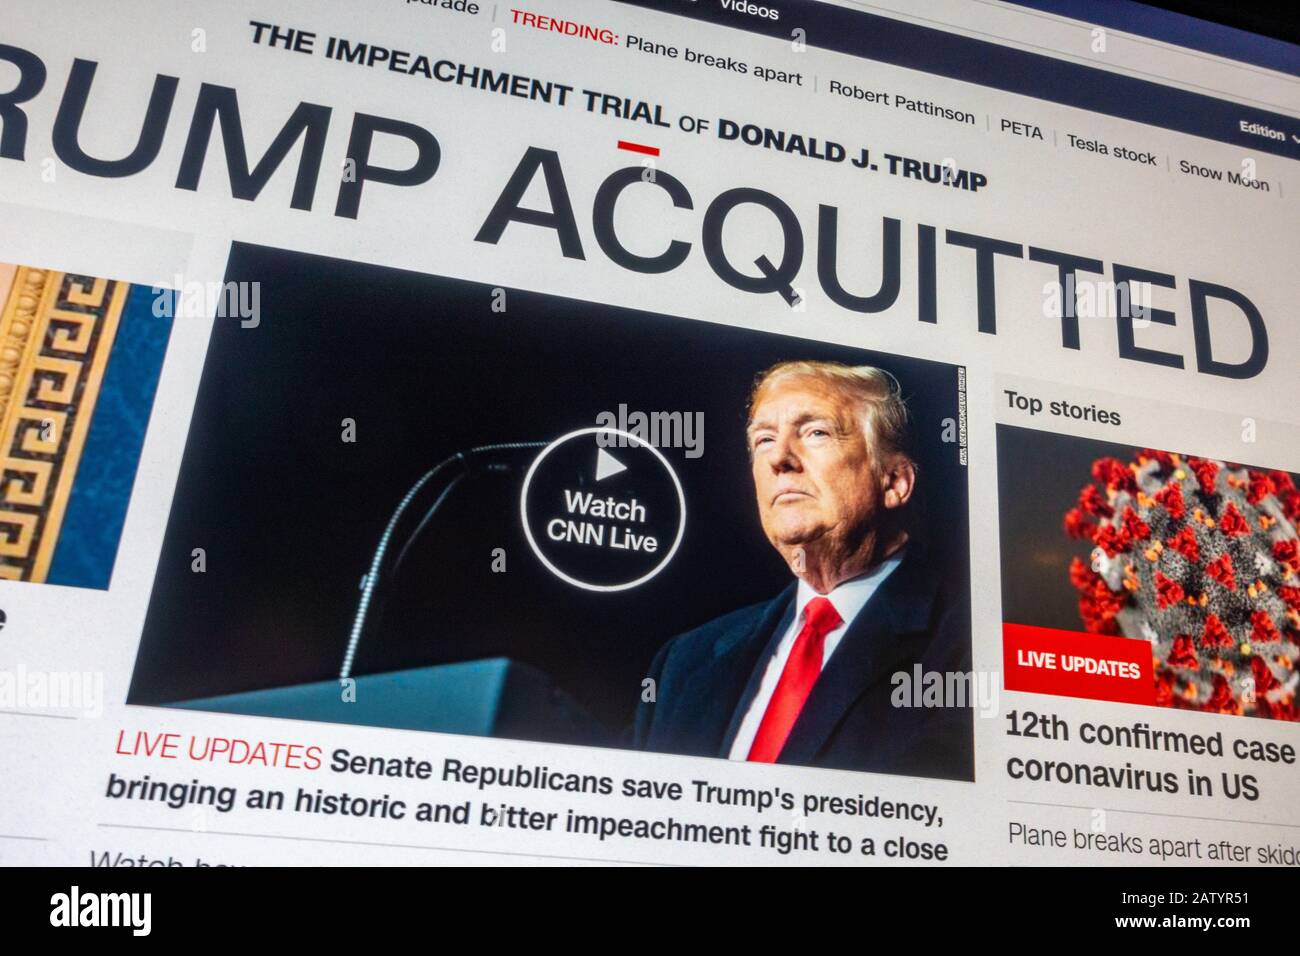 Breaking News on CNN website of President Donald J Trump is acquitted of both Impeachment charges on 5th February 2020. Stock Photo